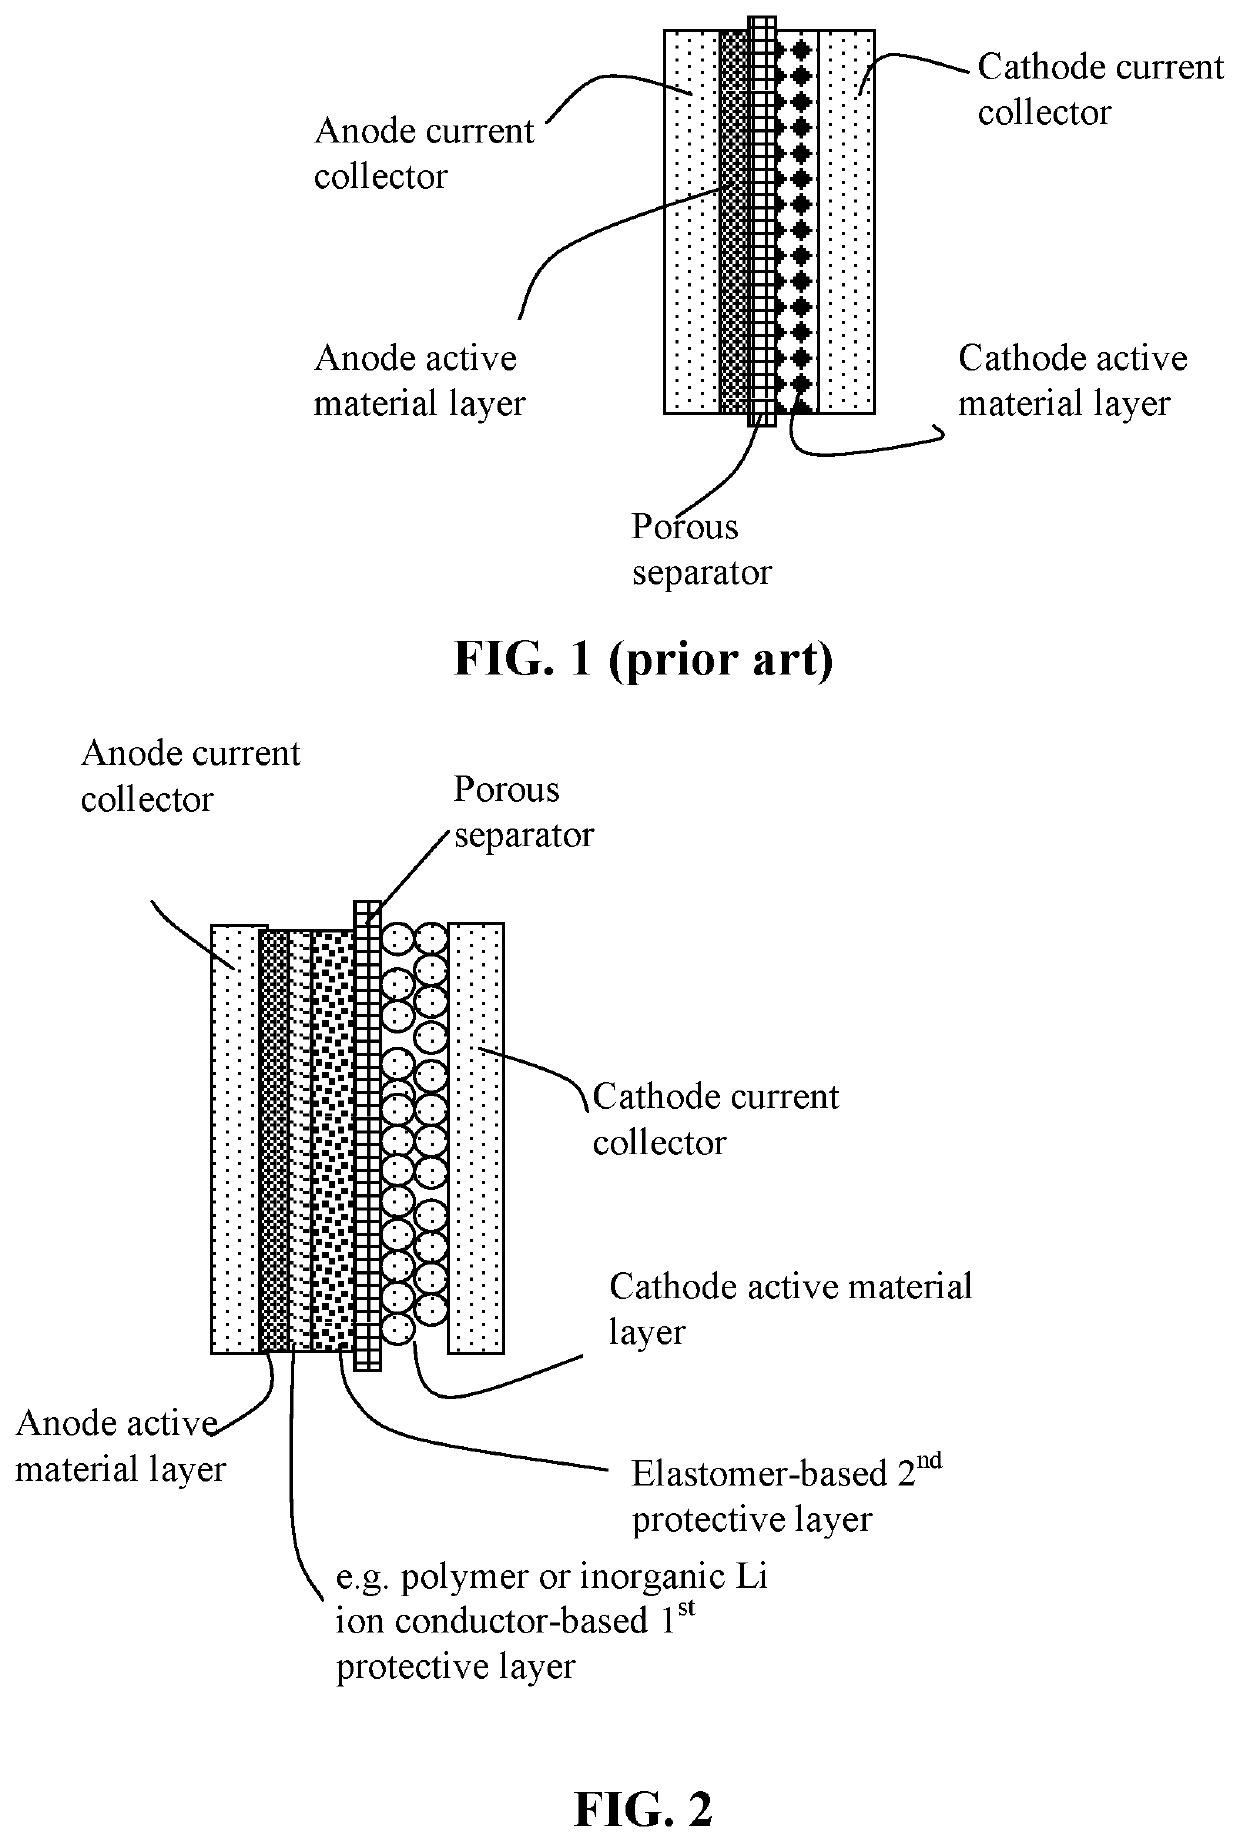 Method of protecting the lithium anode layer in a lithium metal secondary battery